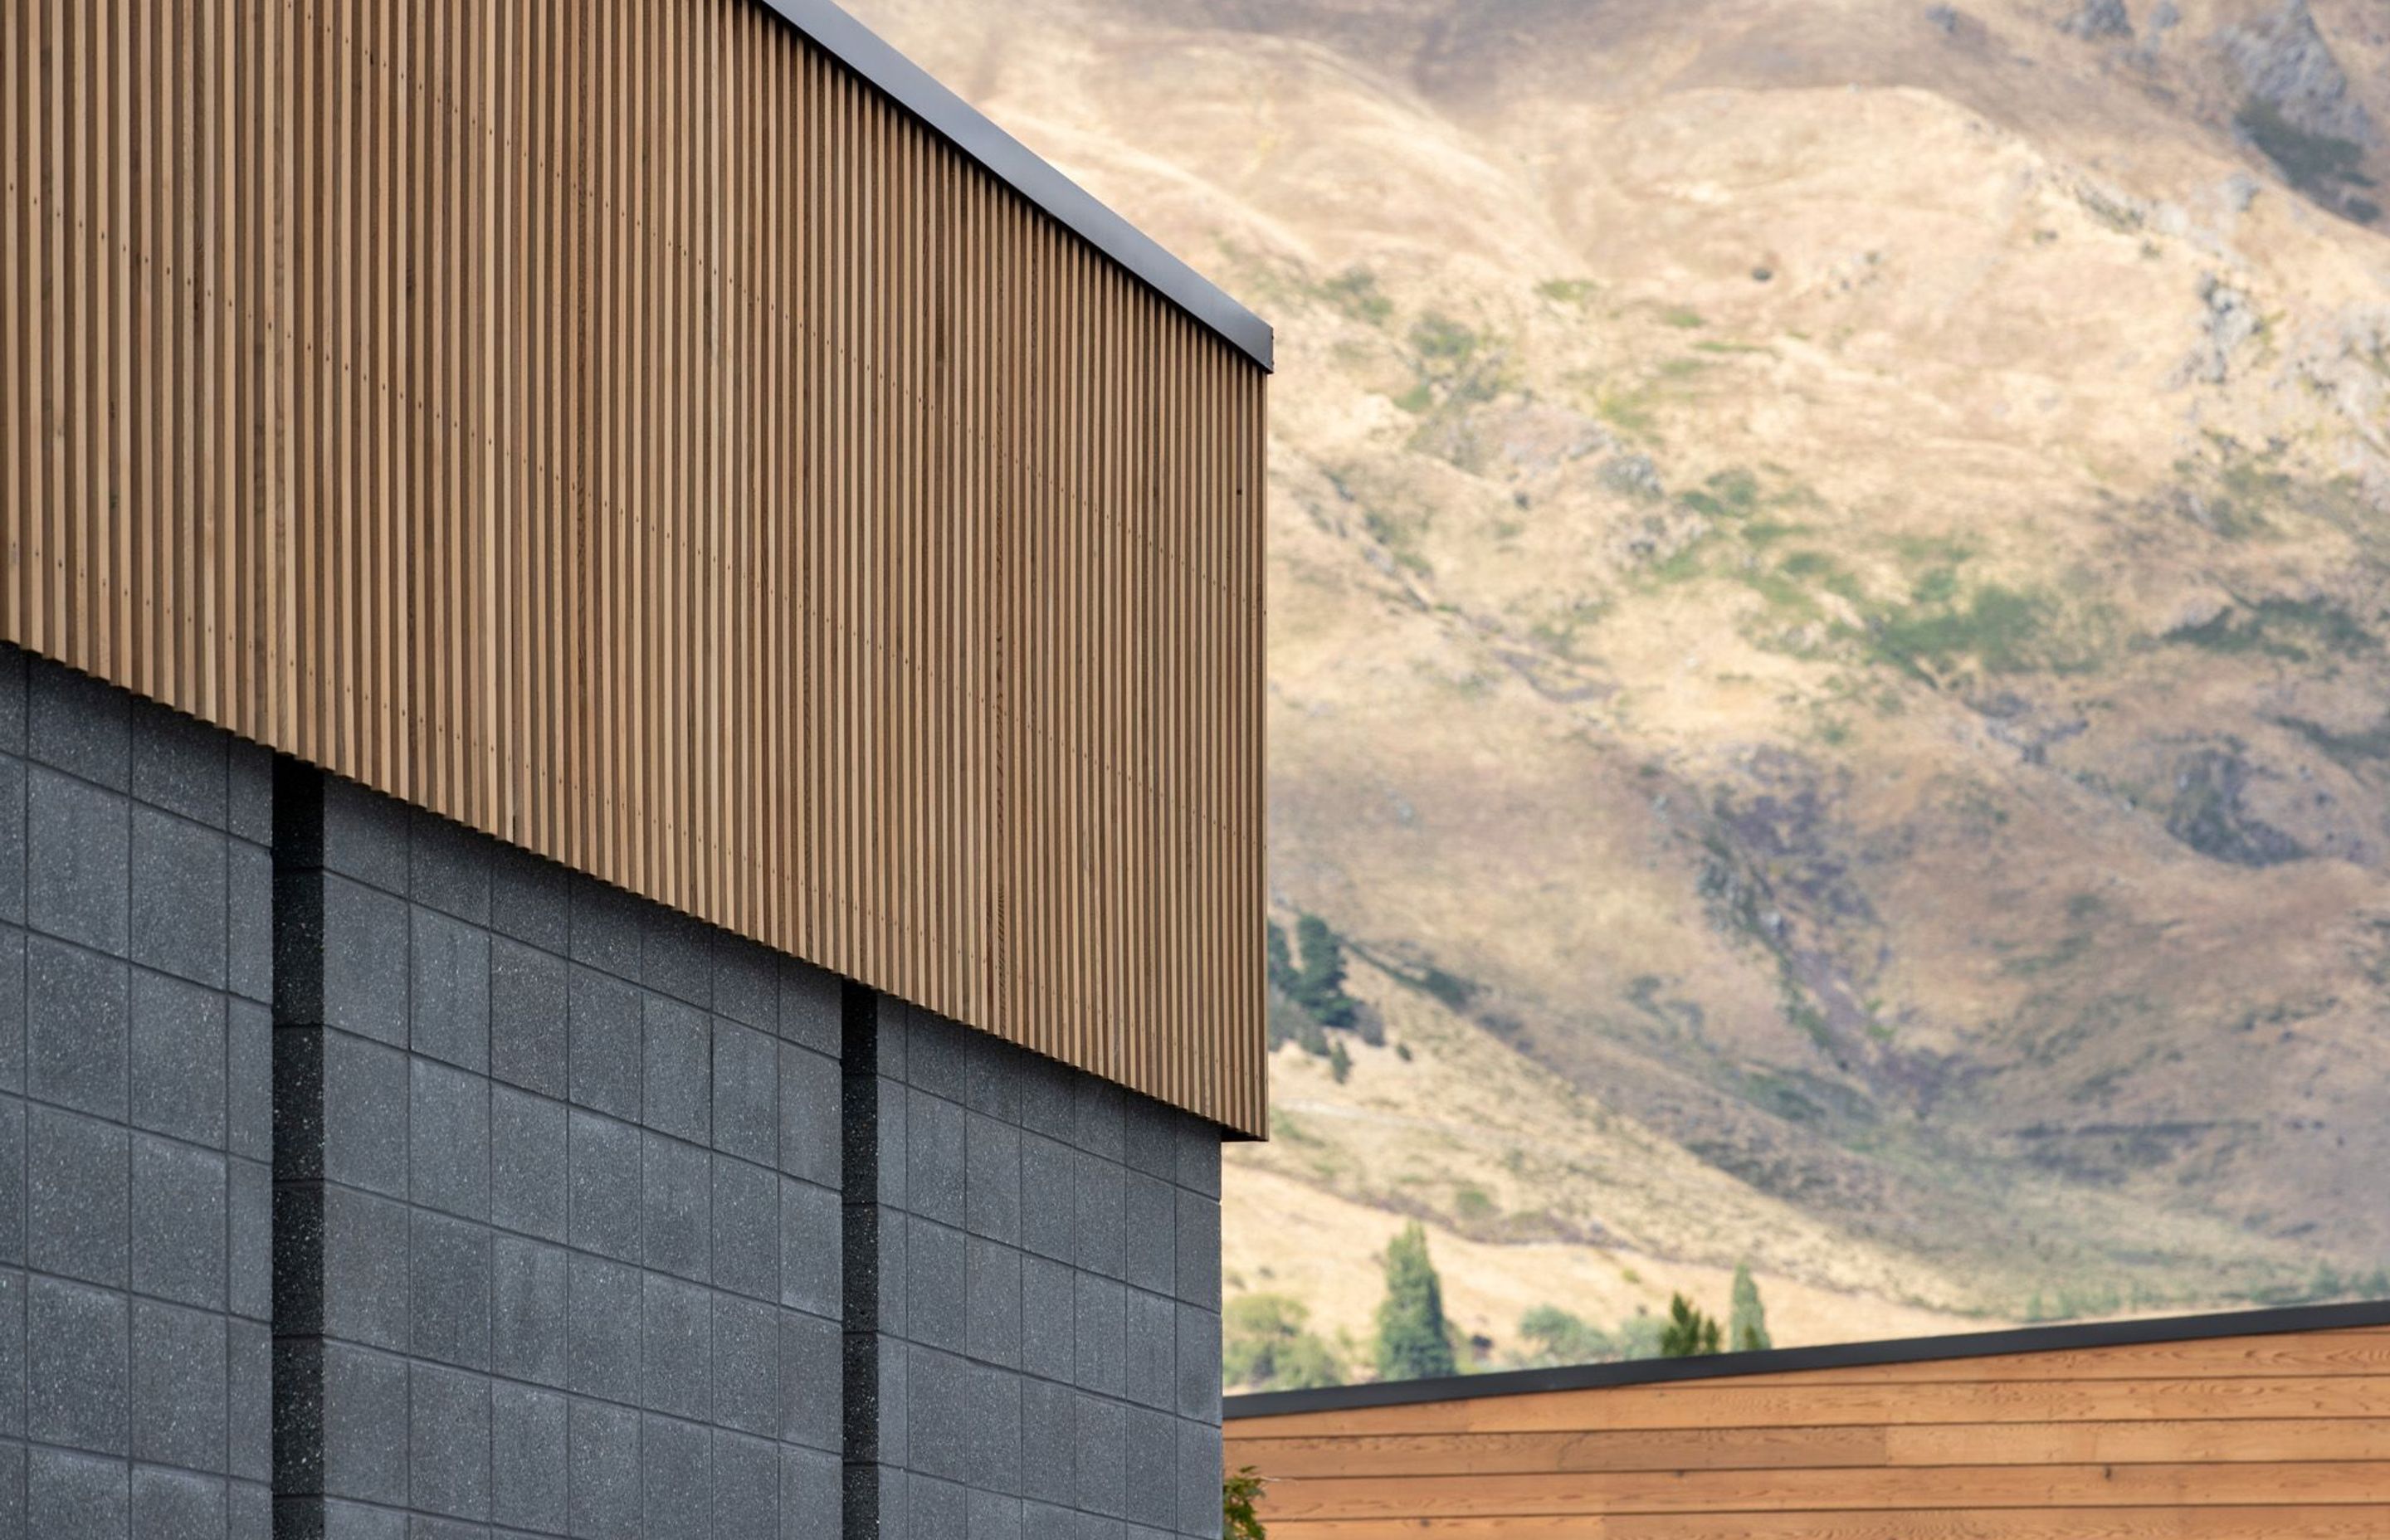 A material palette of timber and concrete complement the surrounding mountains.